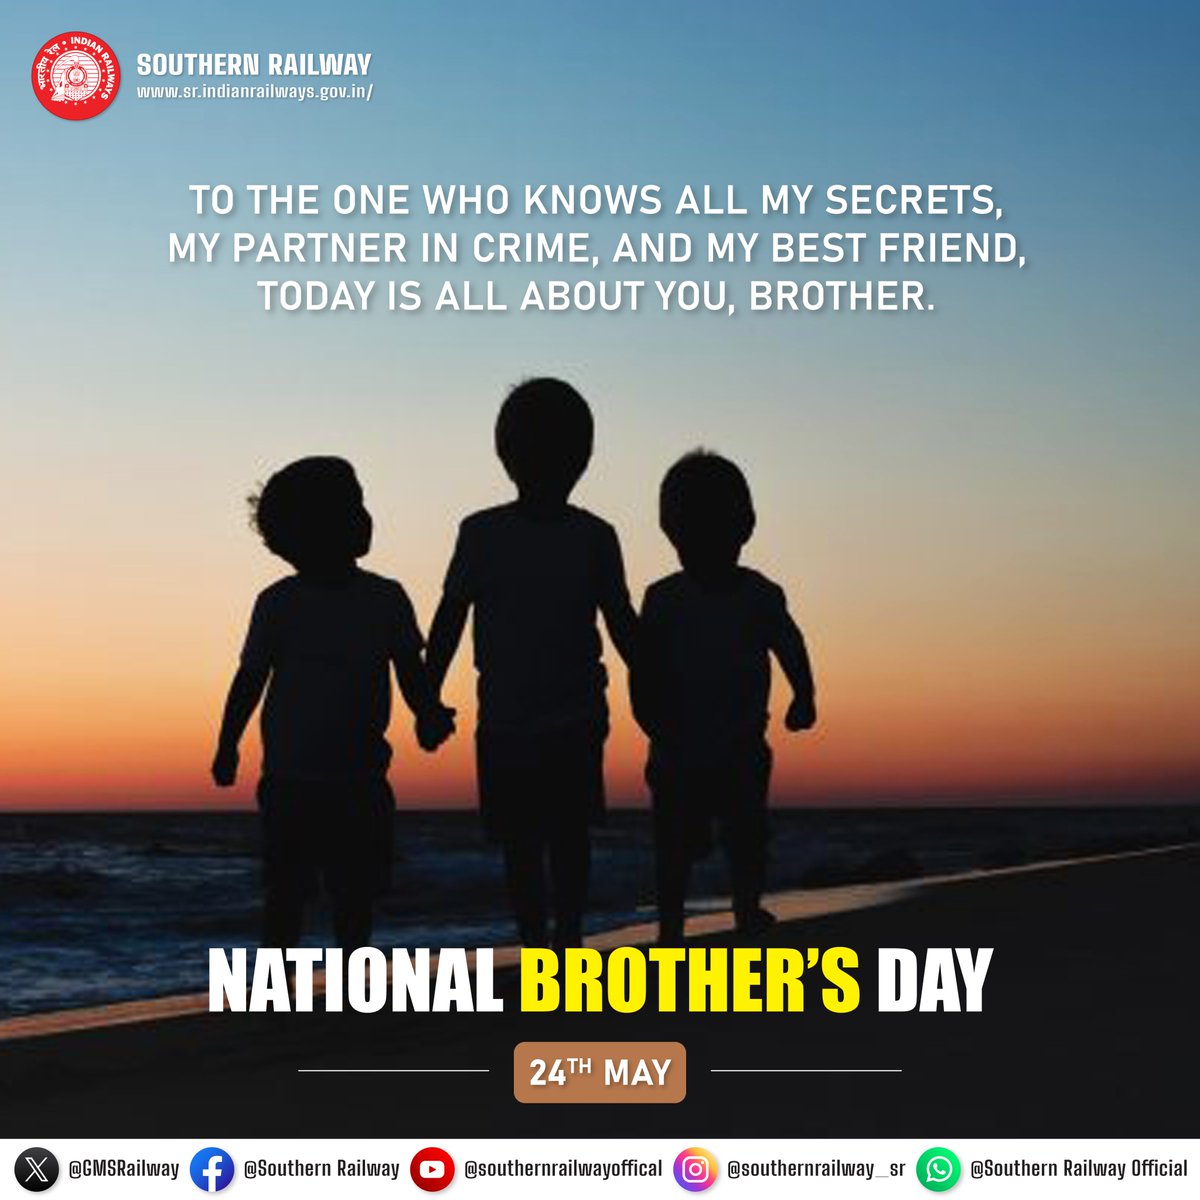 The bond that links your true family is not one of blood but of respect and joy in each other's life. - Richard Bach #NationalBrothersDay #SouthernRailway #Brotherhood #BrothersDay #BrotherhoodBond #CelebratingBrothers #SiblingStrong #BrothersByHeart #BrothersByBlood